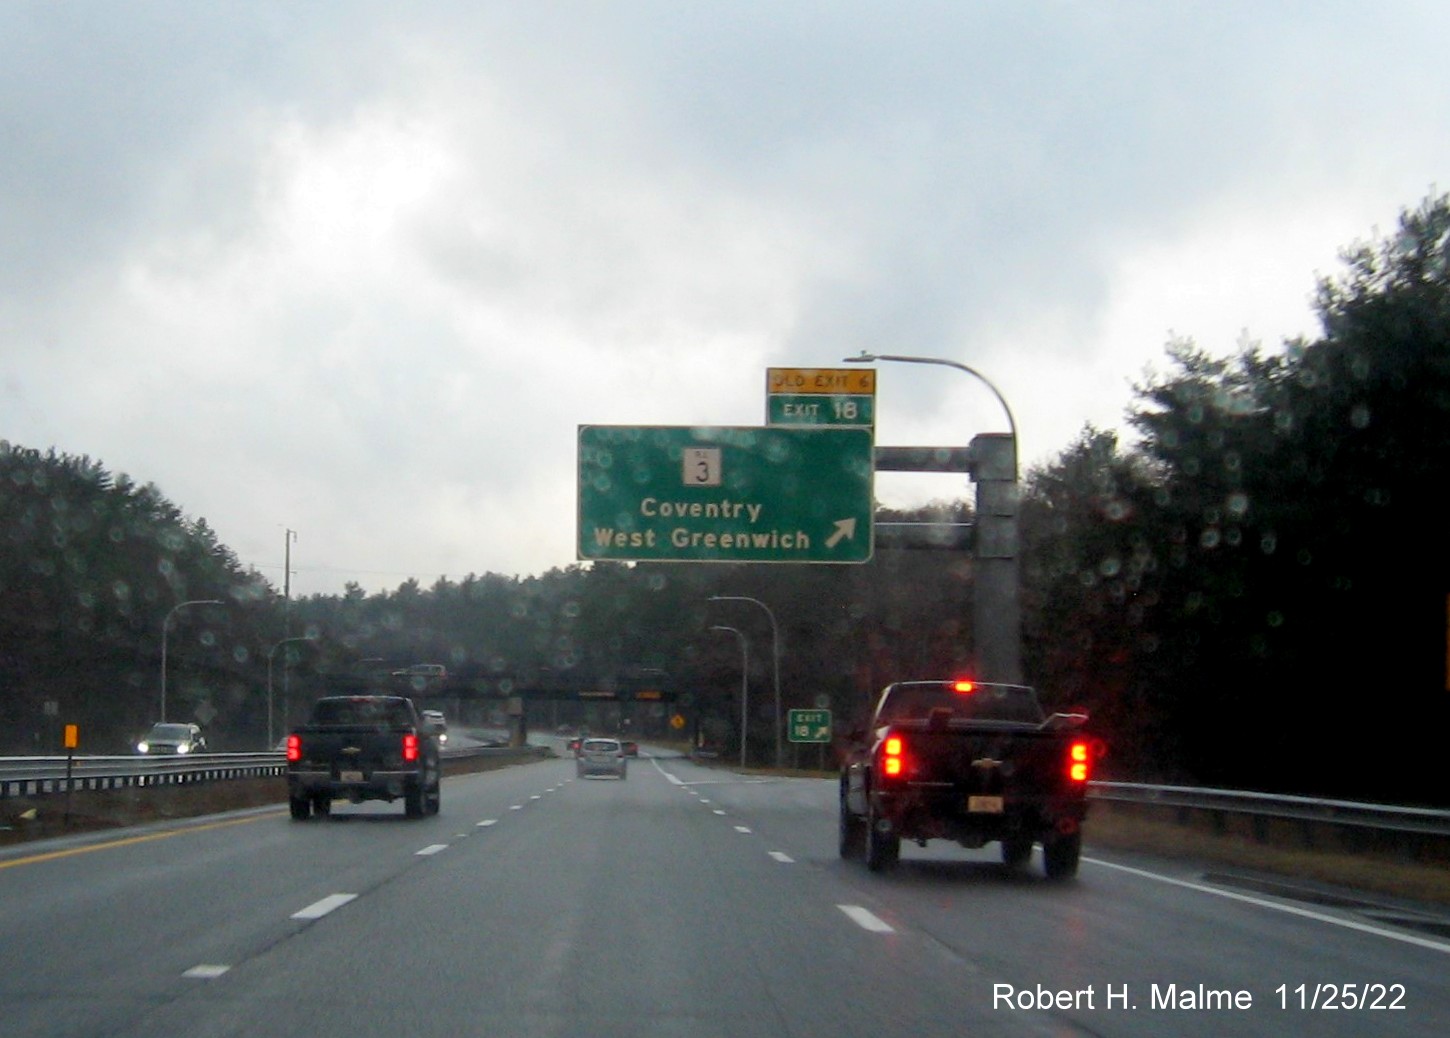 Image of overhead ramp sign for RI 3 exit with new milepost exit number, and yellow Old Exit 6 sign above exit tab, on I-95 South, November 2022